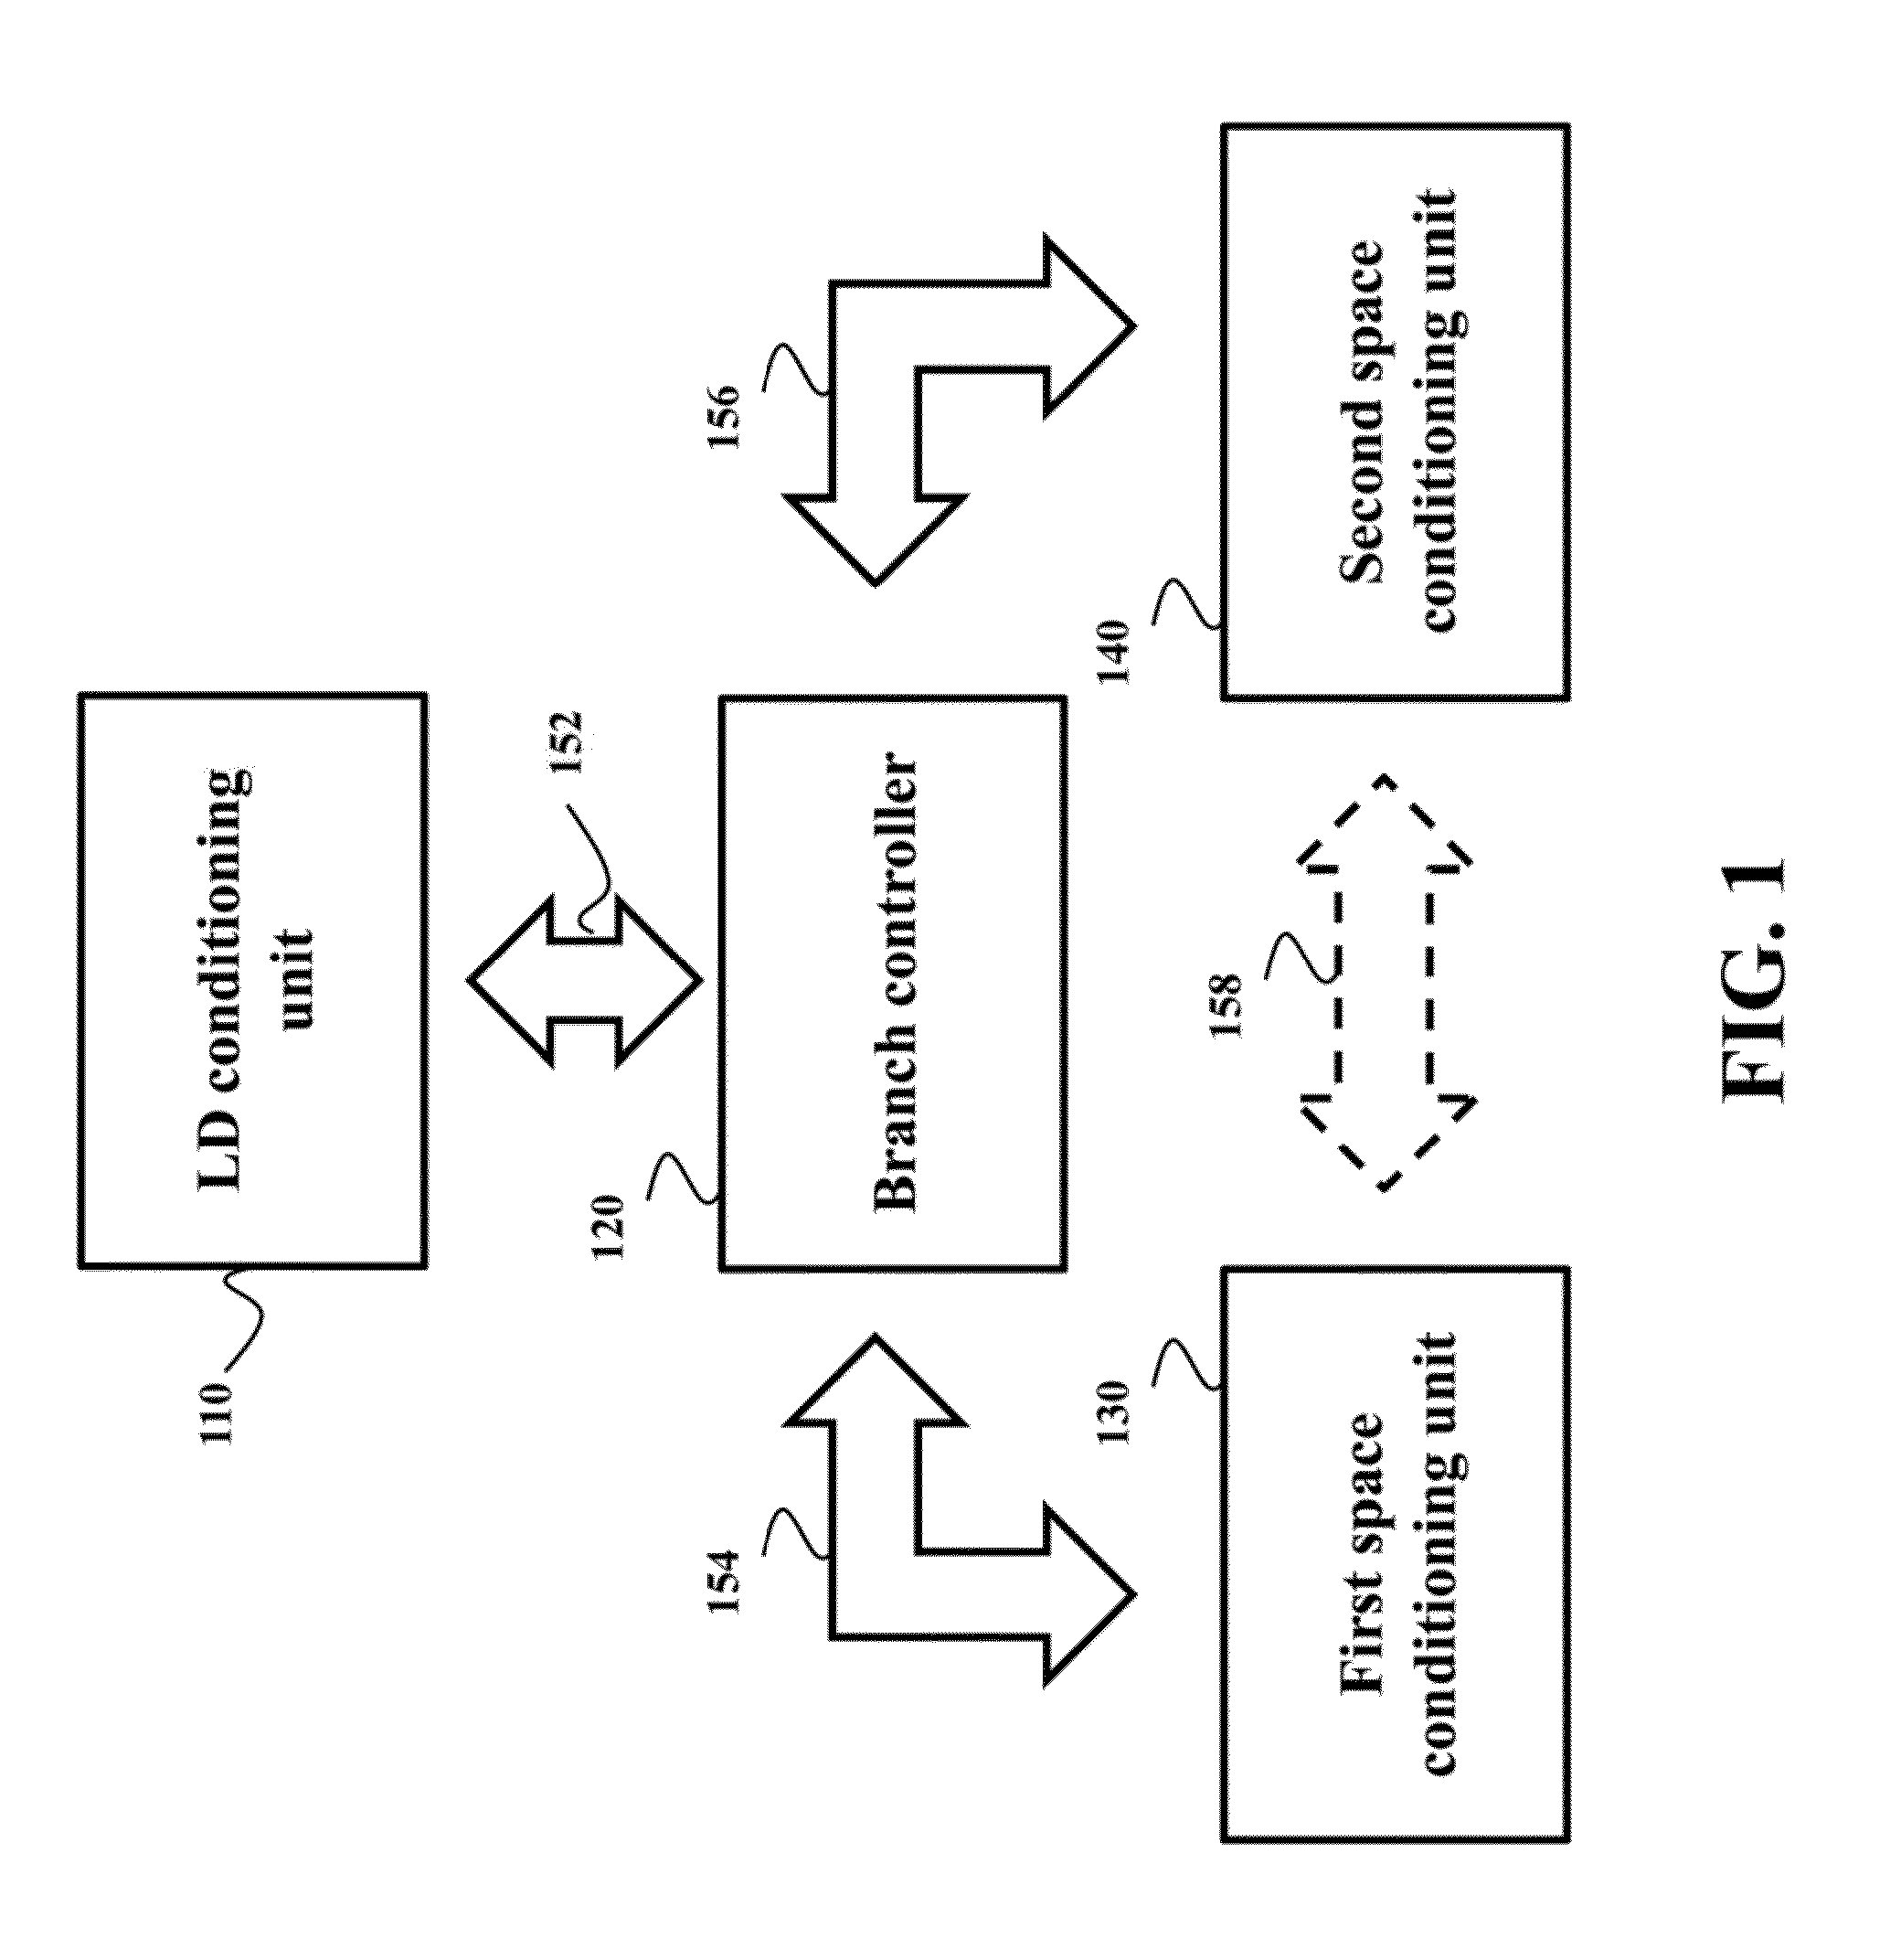 System and Method for Controlling Temperature and Humidity in Multiple Spaces using Liquid Desiccant